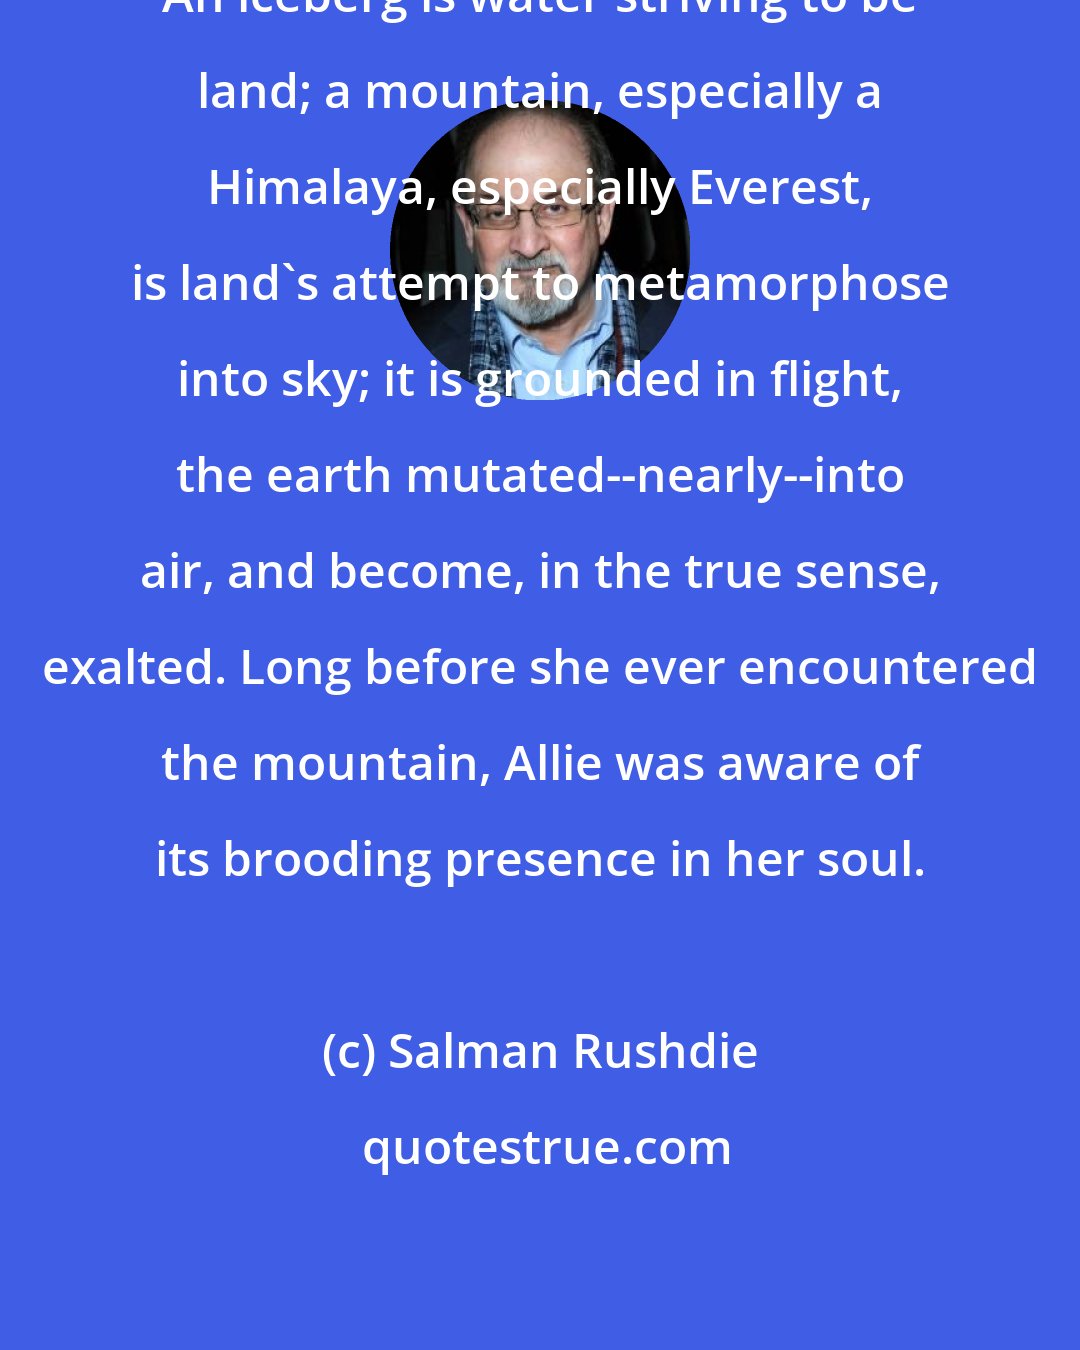 Salman Rushdie: An iceberg is water striving to be land; a mountain, especially a Himalaya, especially Everest, is land's attempt to metamorphose into sky; it is grounded in flight, the earth mutated--nearly--into air, and become, in the true sense, exalted. Long before she ever encountered the mountain, Allie was aware of its brooding presence in her soul.